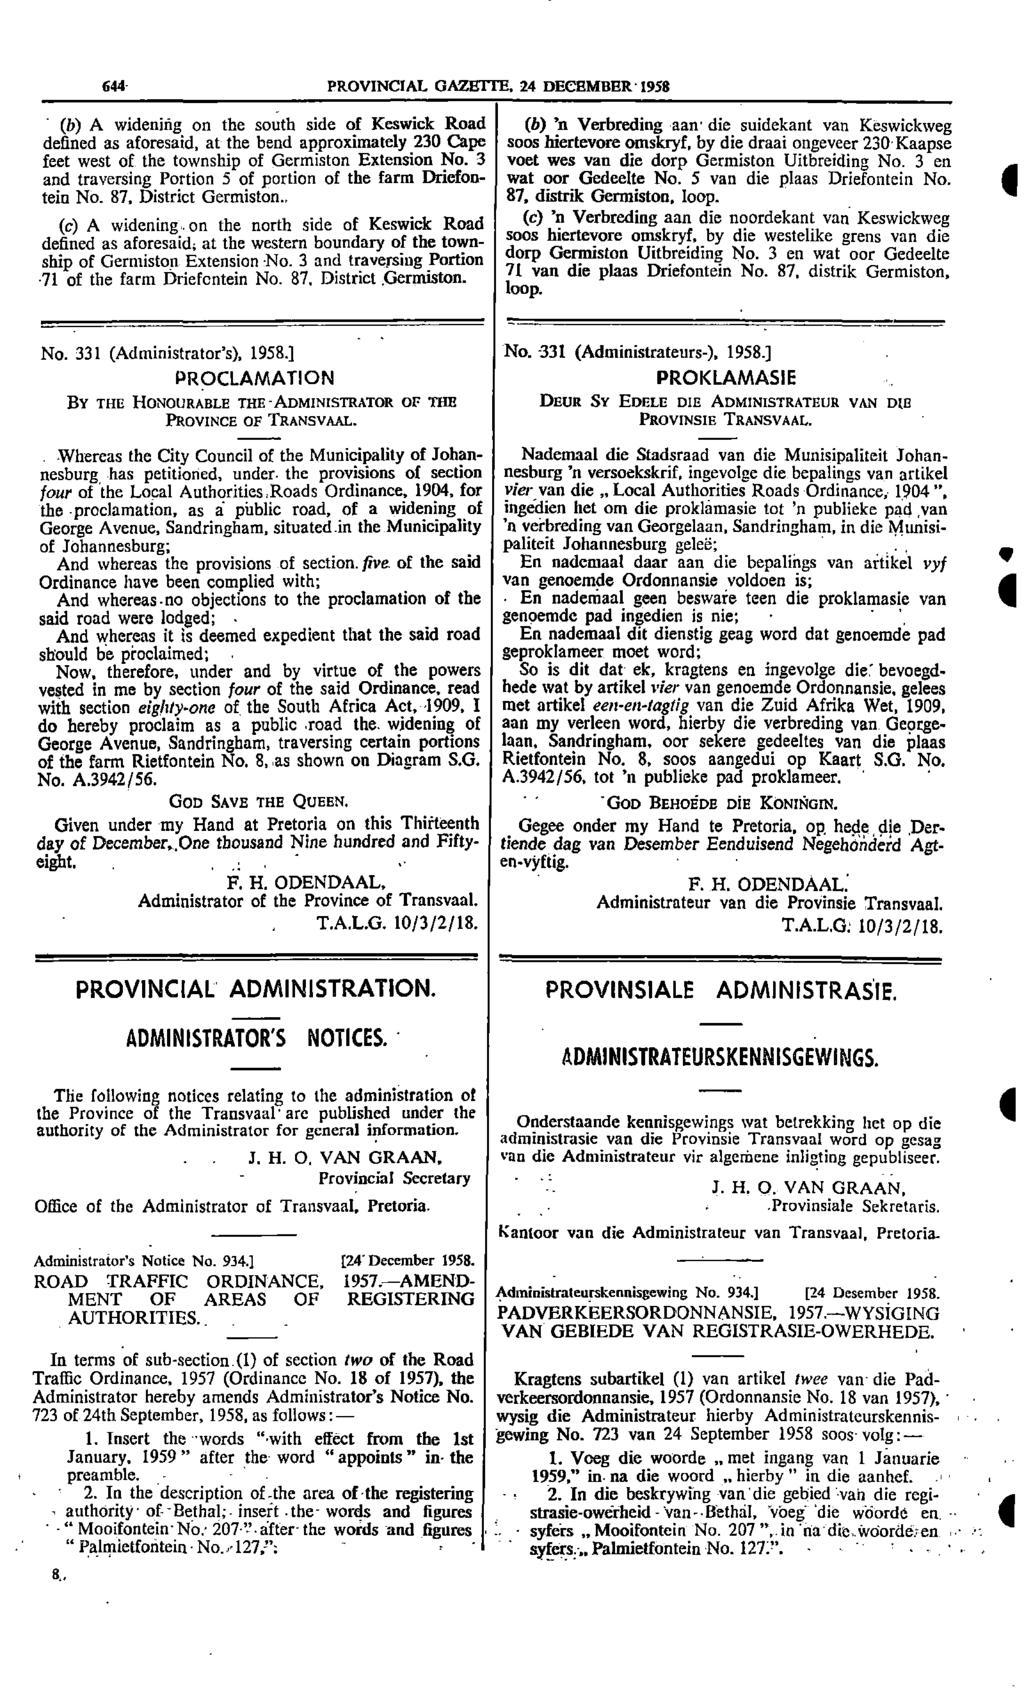 6 PROVNCAL GAZETTE 2 DECEMBER 1958 (b) A widening on the south side of Keswick Road (b) n Verbreding amr die suidekant van Keswickweg defined as aforesaid at the bend approximately 230 Cape sops